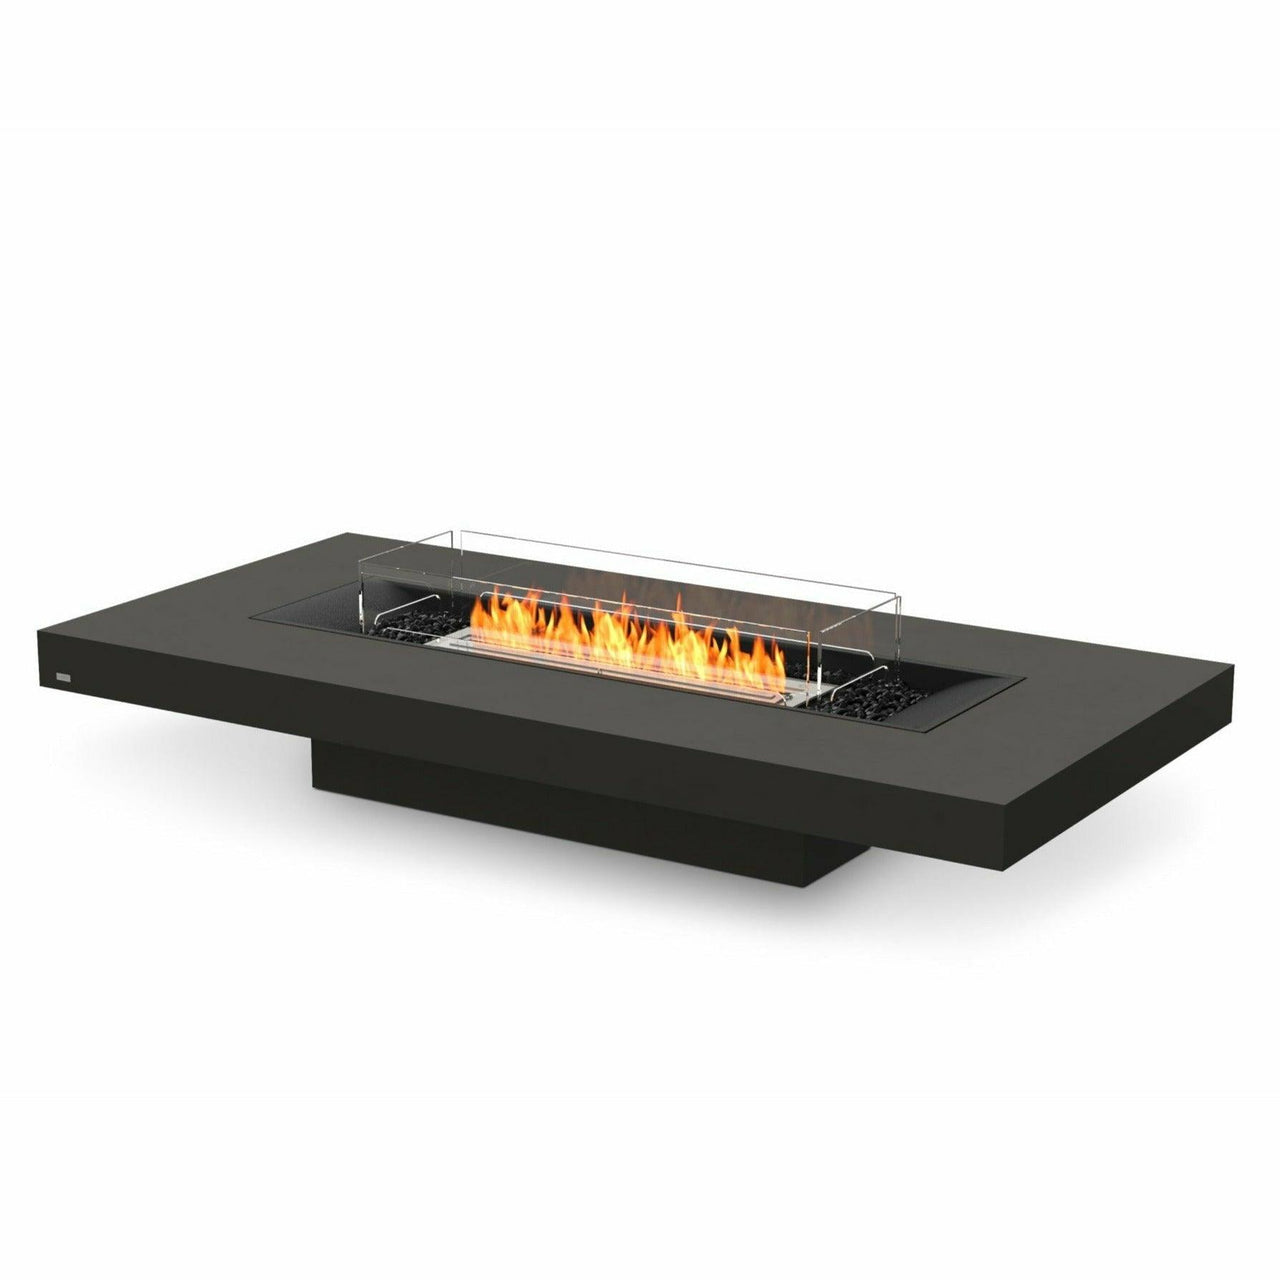 EcoSmart Fire - Gin 90"(Low) Rectangular Concrete Fire Pit Table - Fire Pit Stock